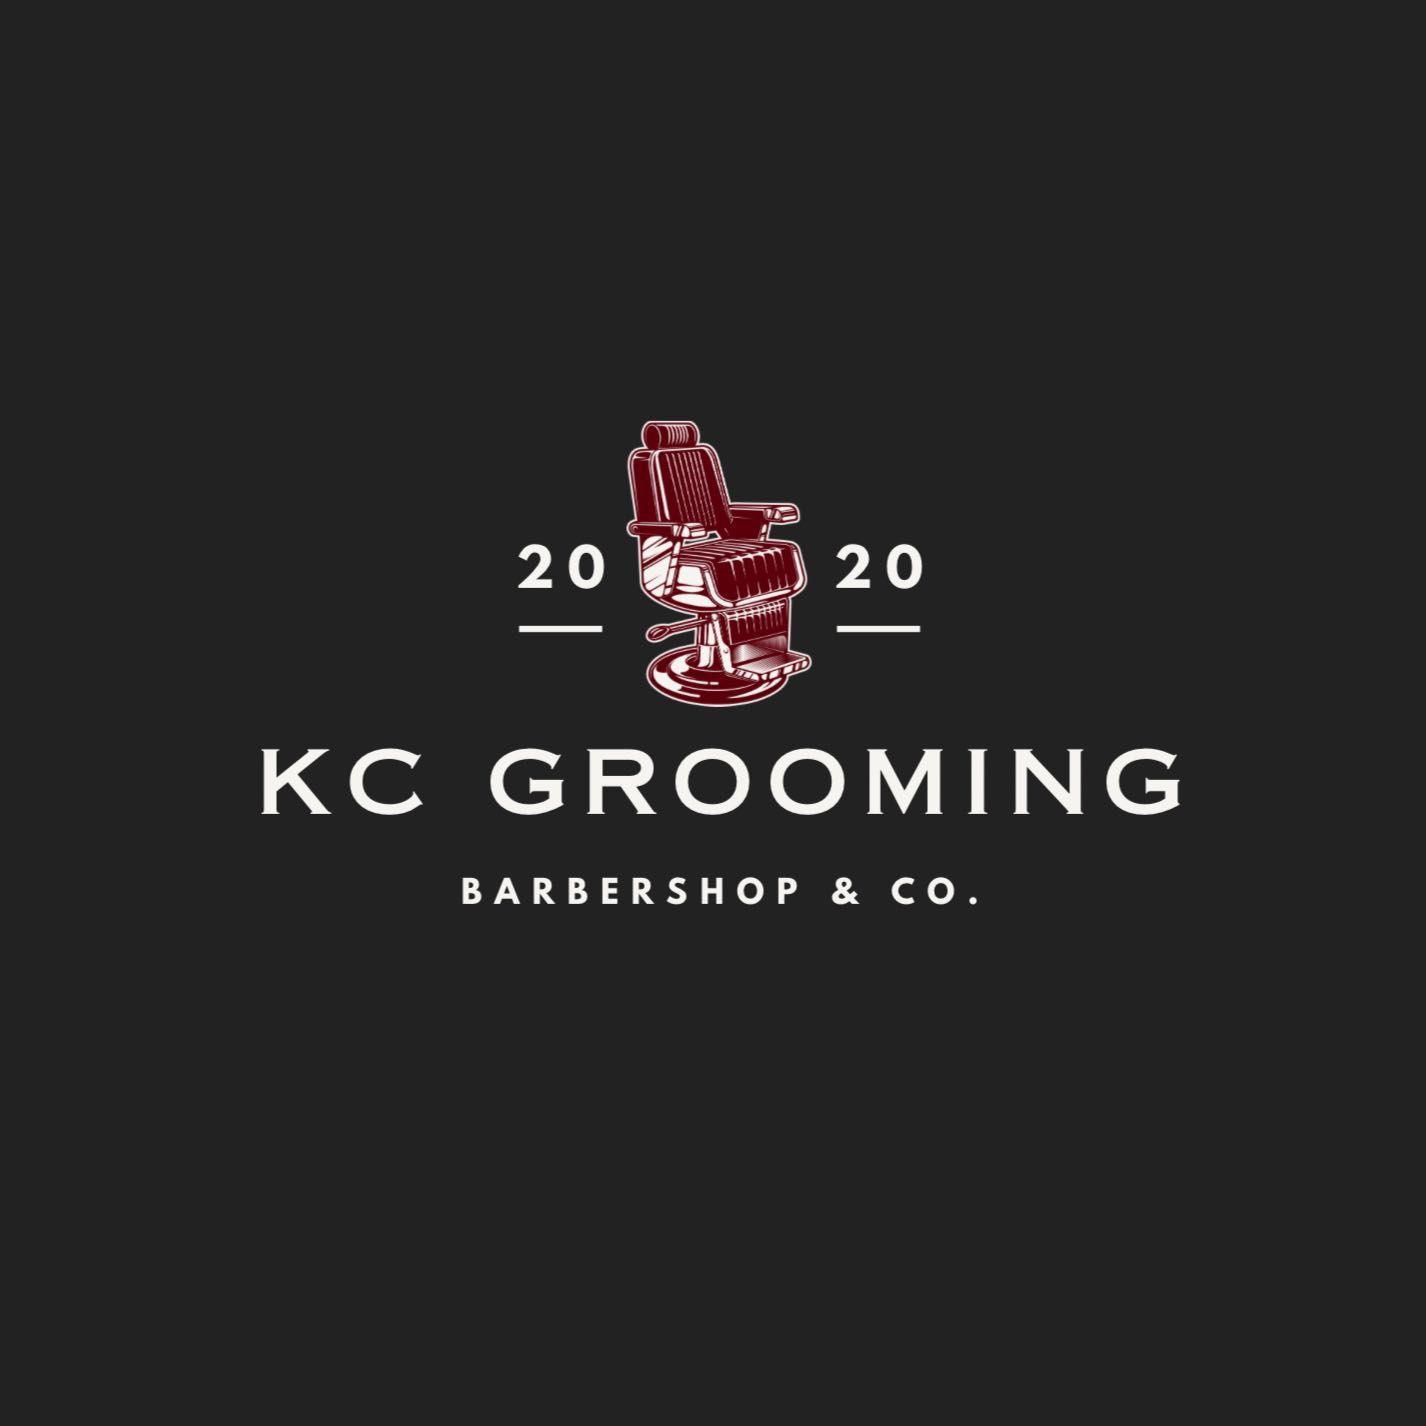 KC Grooming - The Barbershop, 96 11th St, Parkmore, 2196, Sandton